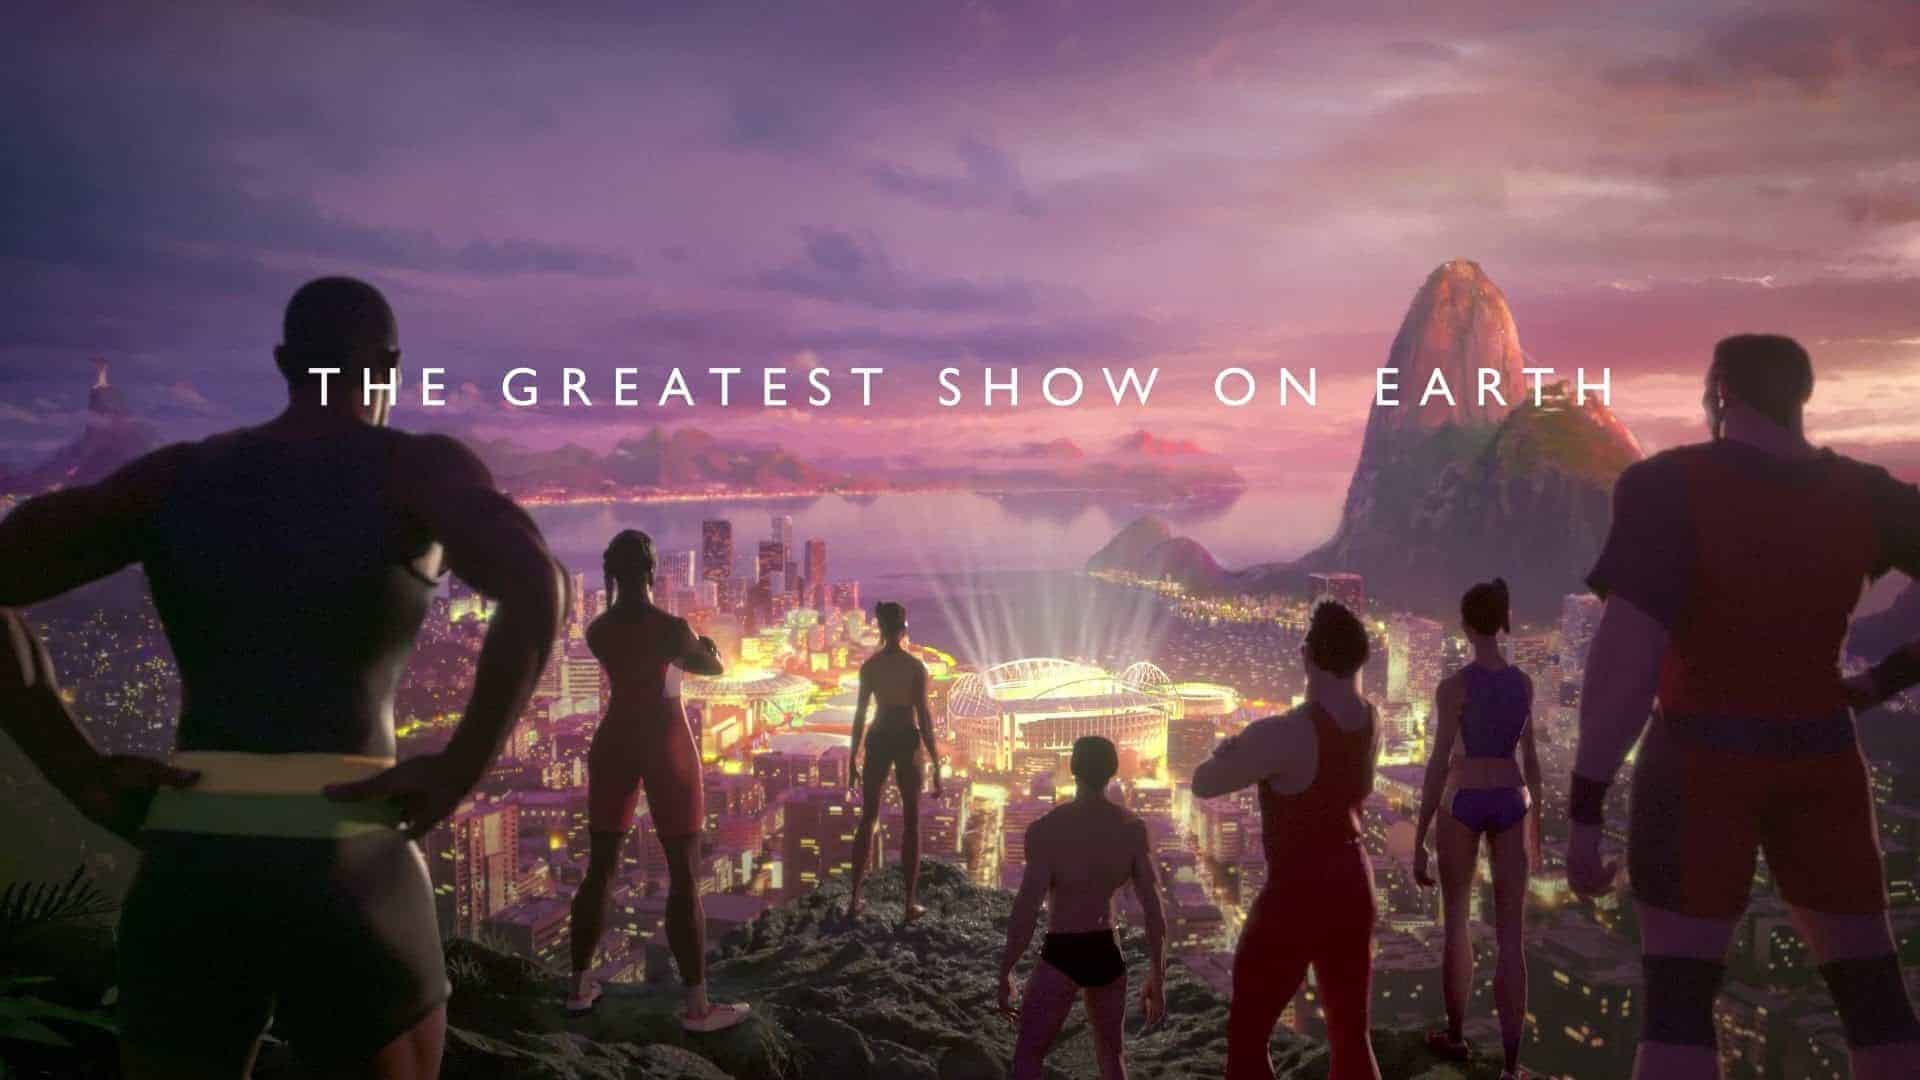 BBC advertisement for the Rio Olympics